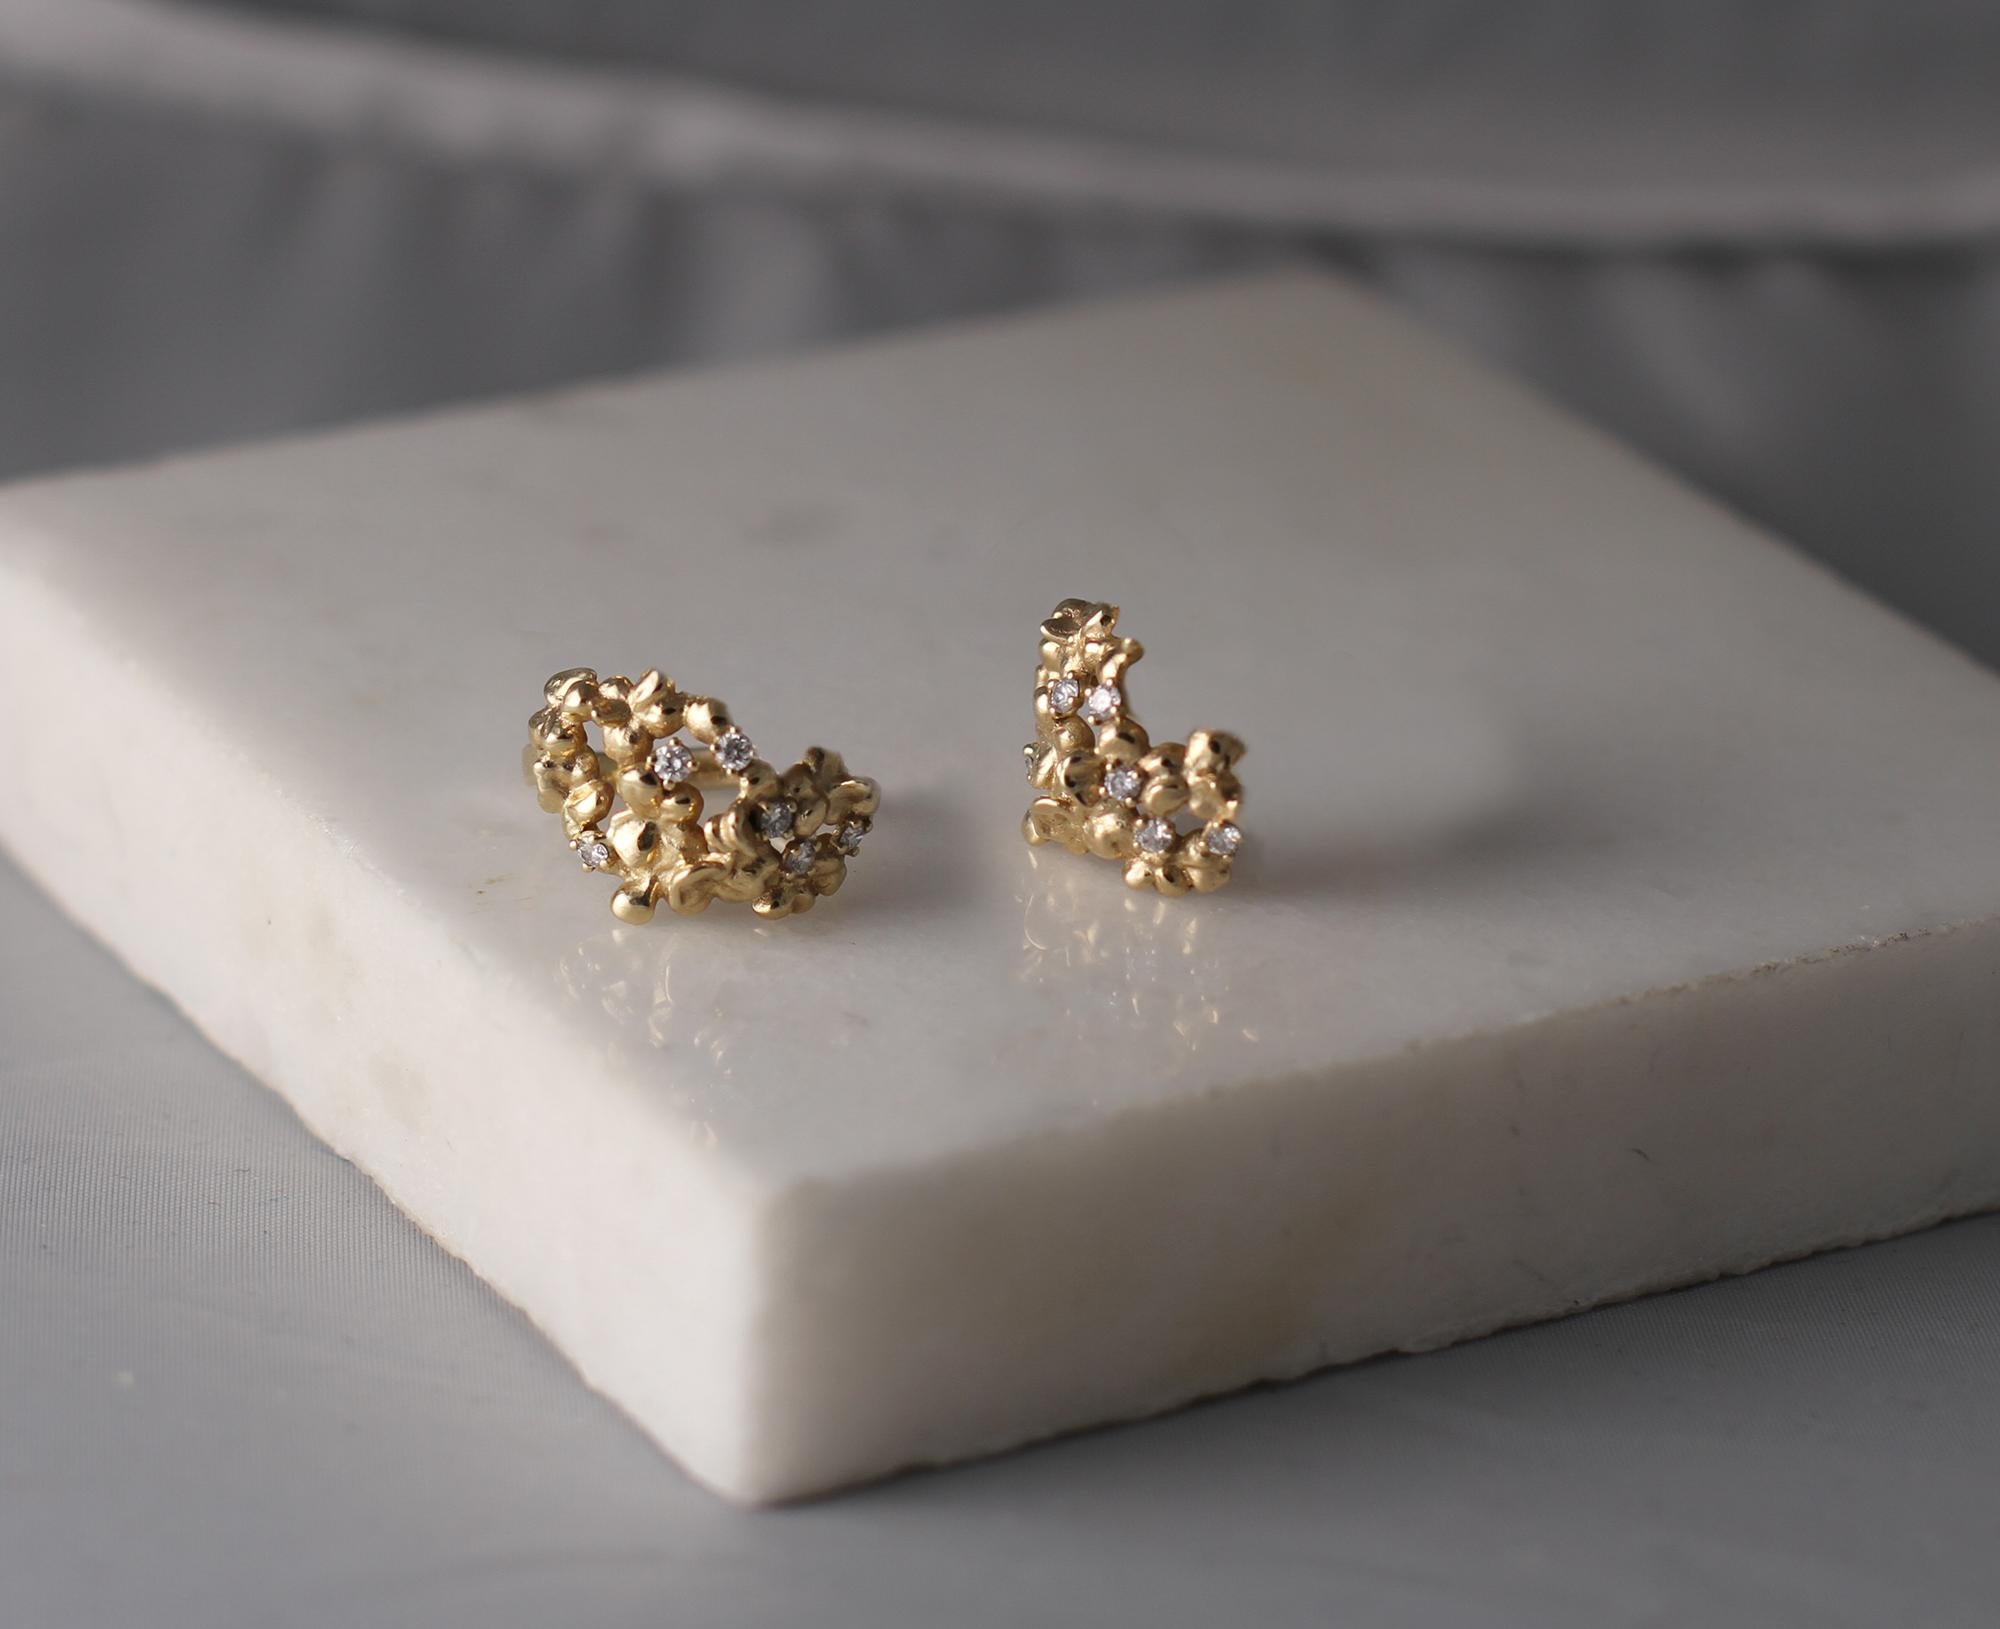 This contemporary Hortensia clip-on earrings are in 18 karat yellow gold with round natural diamonds, VS, F-G. The sculptural design adds the extra highlights to the surface of the gold. The diamonds add the delicate blinks. This jewellery